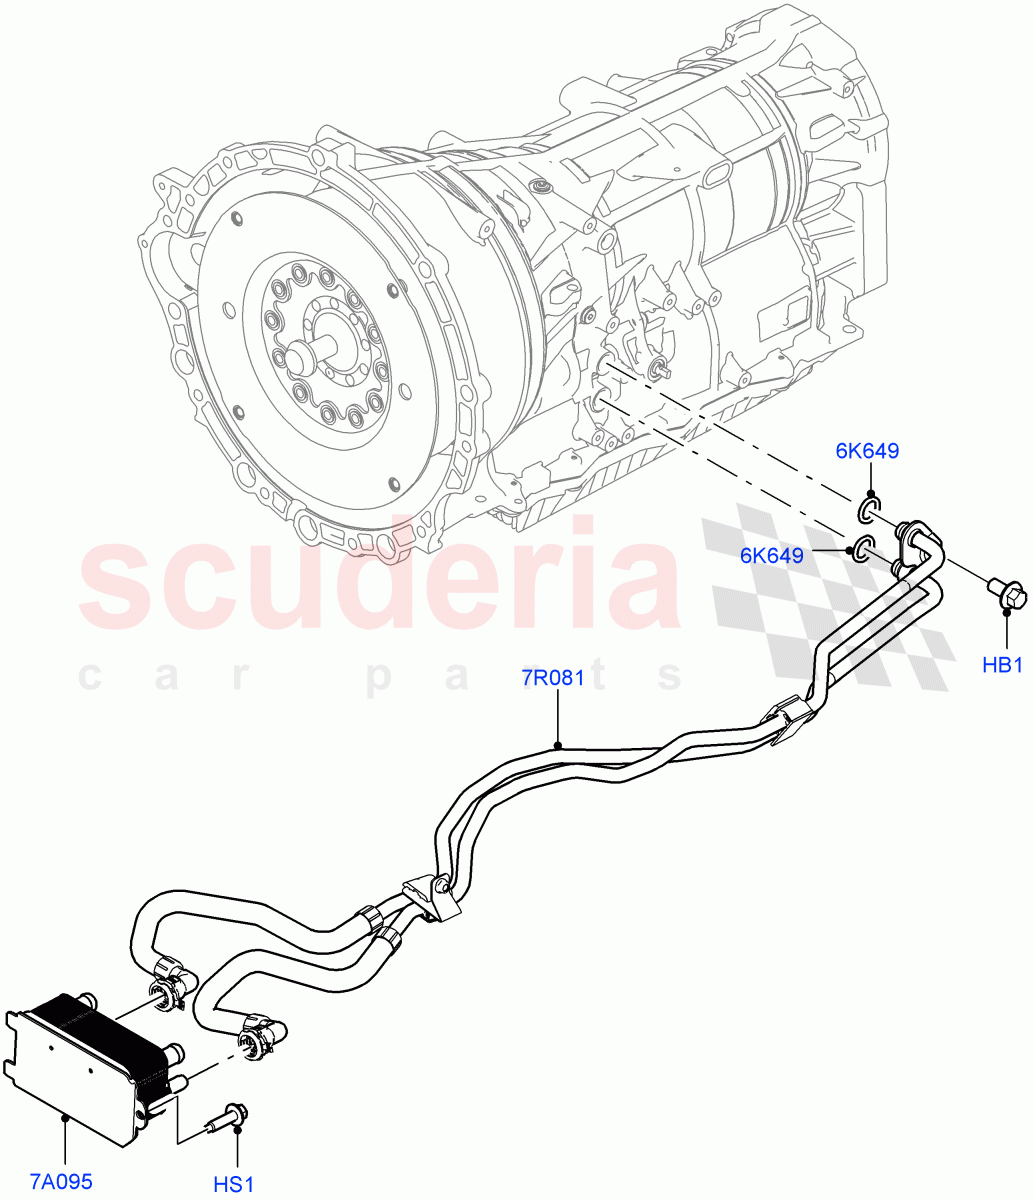 Transmission Cooling Systems(Solihull Plant Build)(2.0L I4 High DOHC AJ200 Petrol,8 Speed Auto Trans ZF 8HP45)((V)FROMJA000001) of Land Rover Land Rover Range Rover Sport (2014+) [2.0 Turbo Diesel]